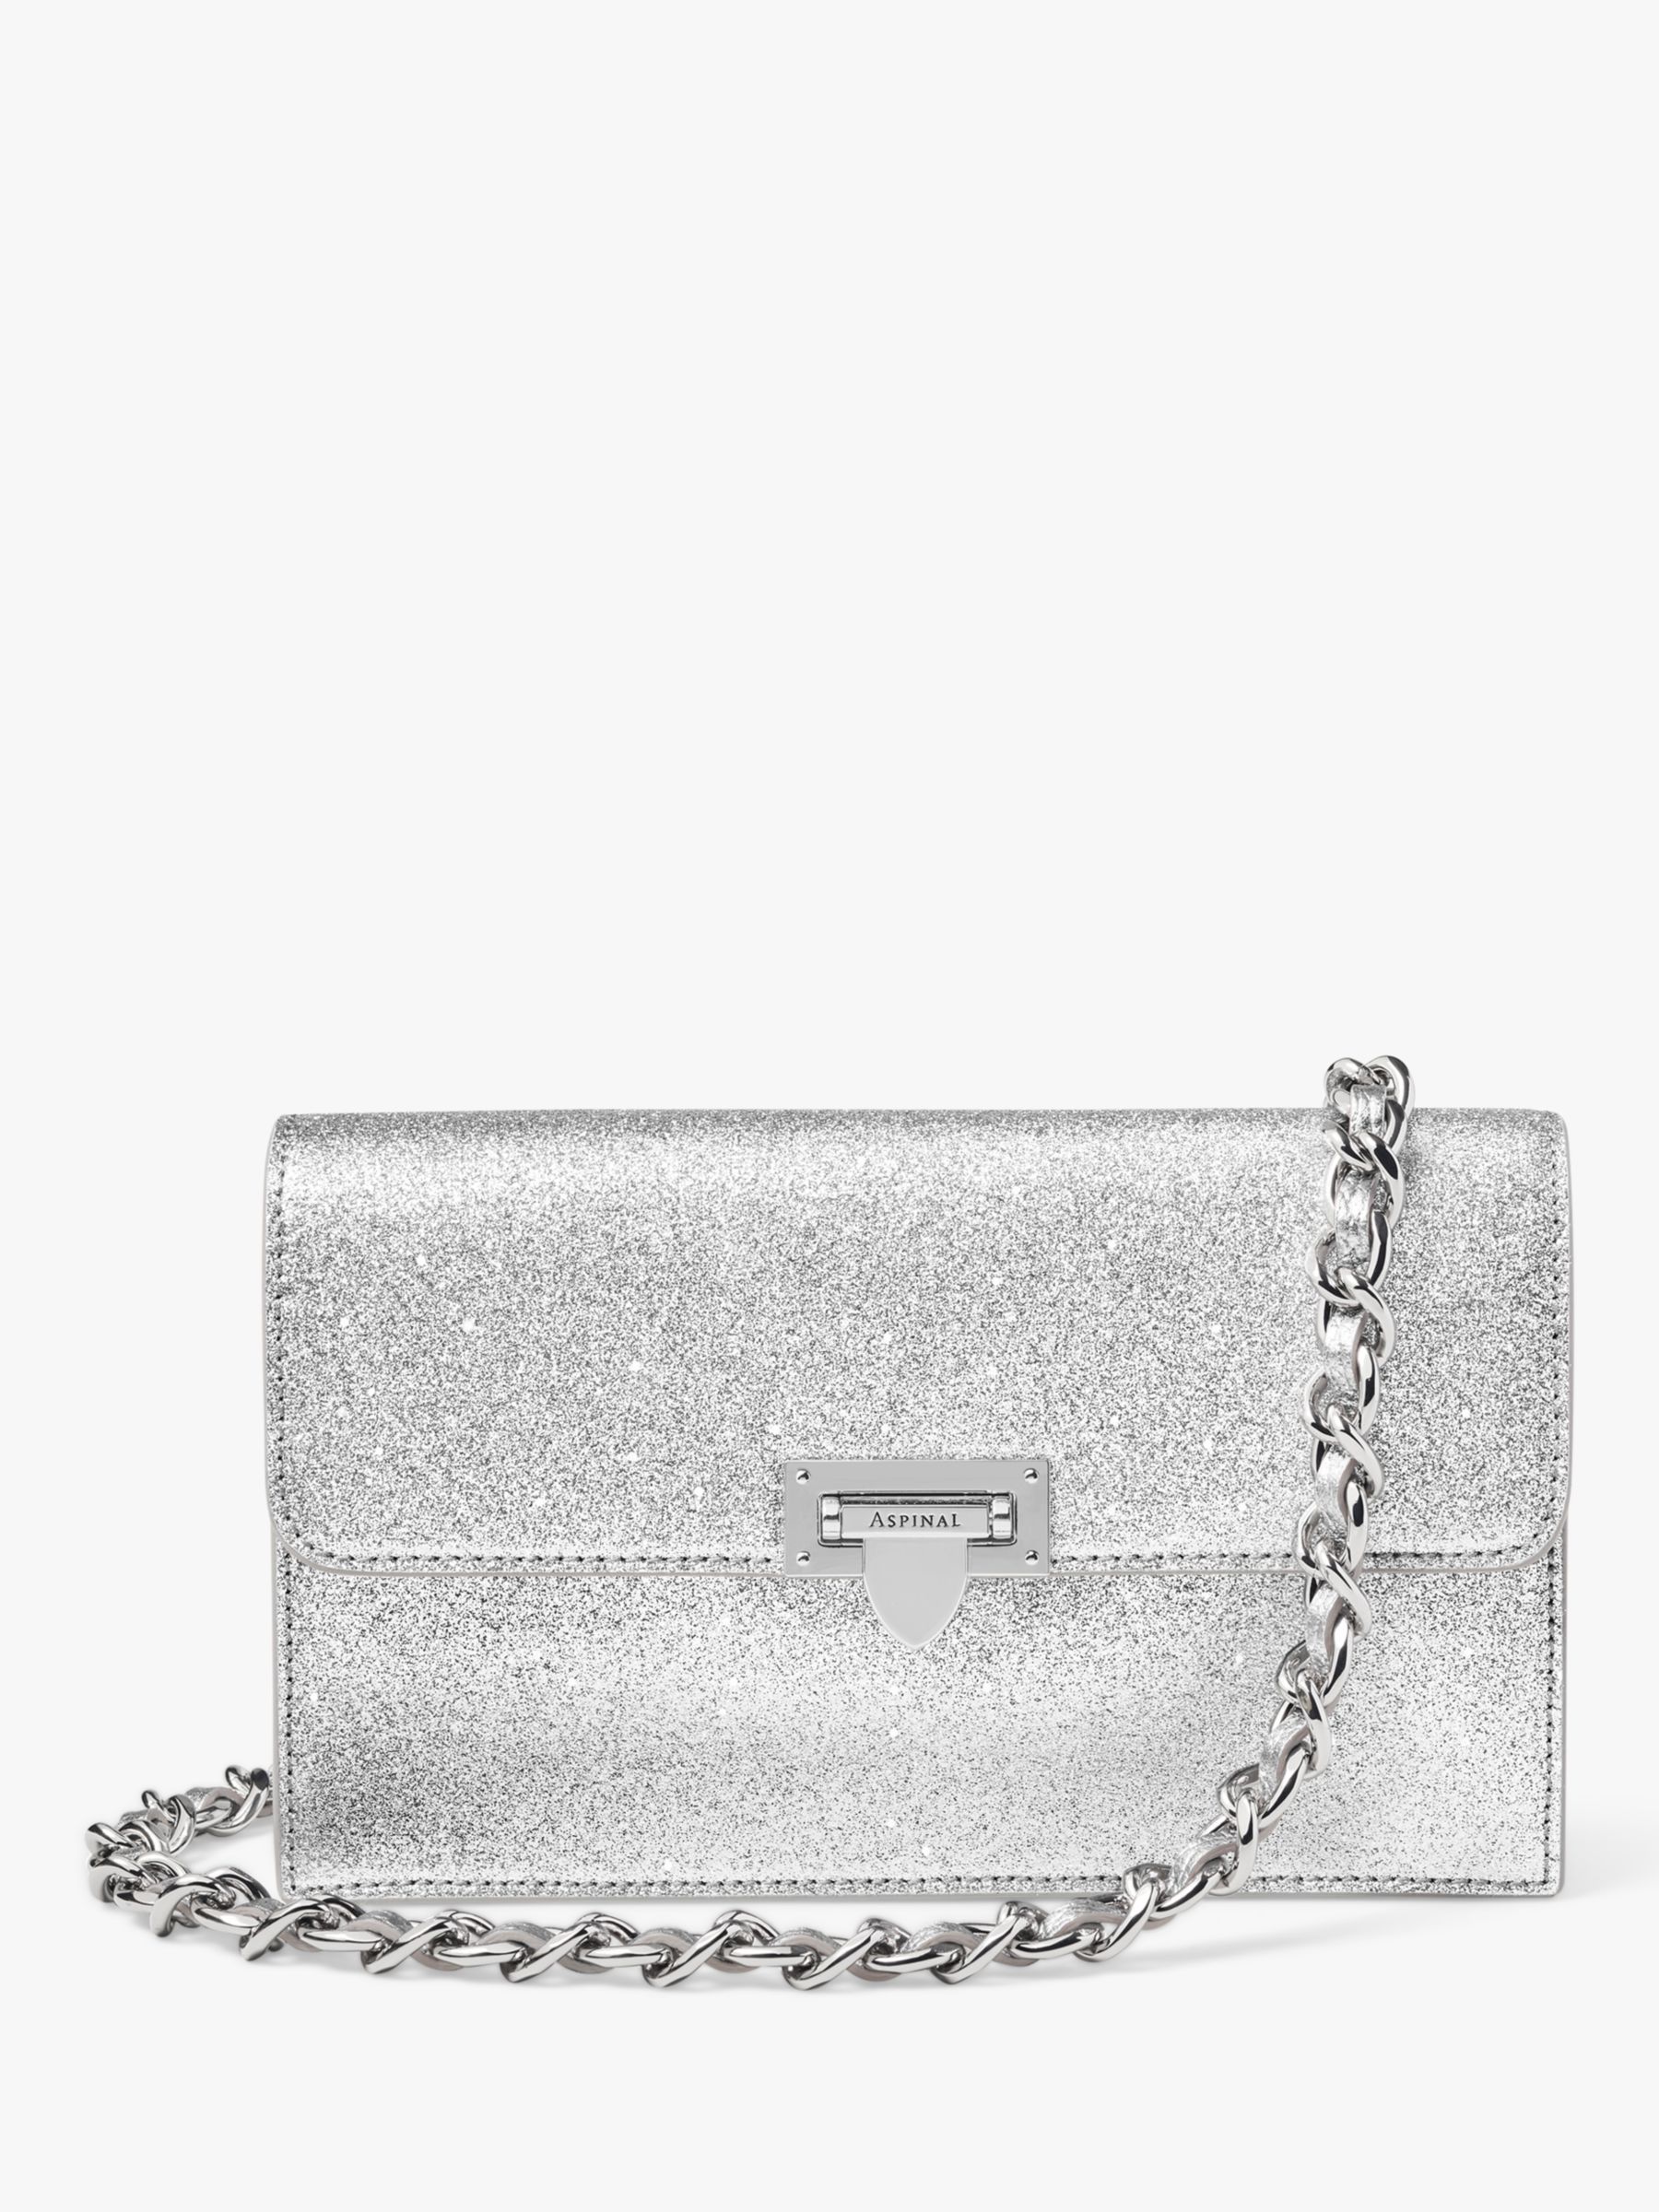 Aspinal of London Lottie Leather Glitter Clutch Bag, Silver